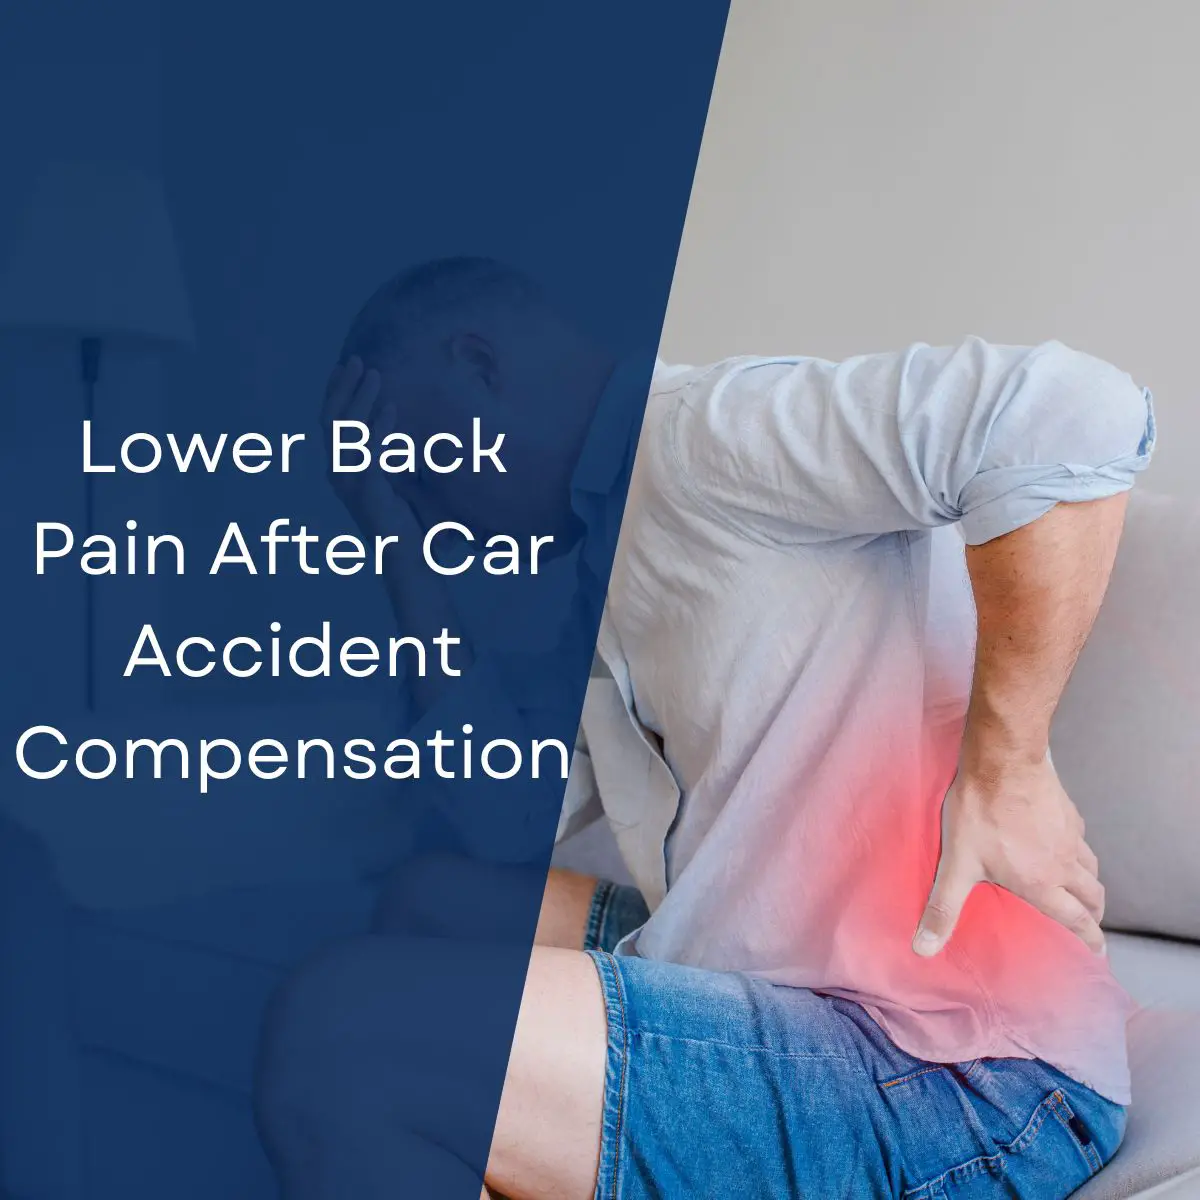 Lower Back Pain After Car Accident Compensation